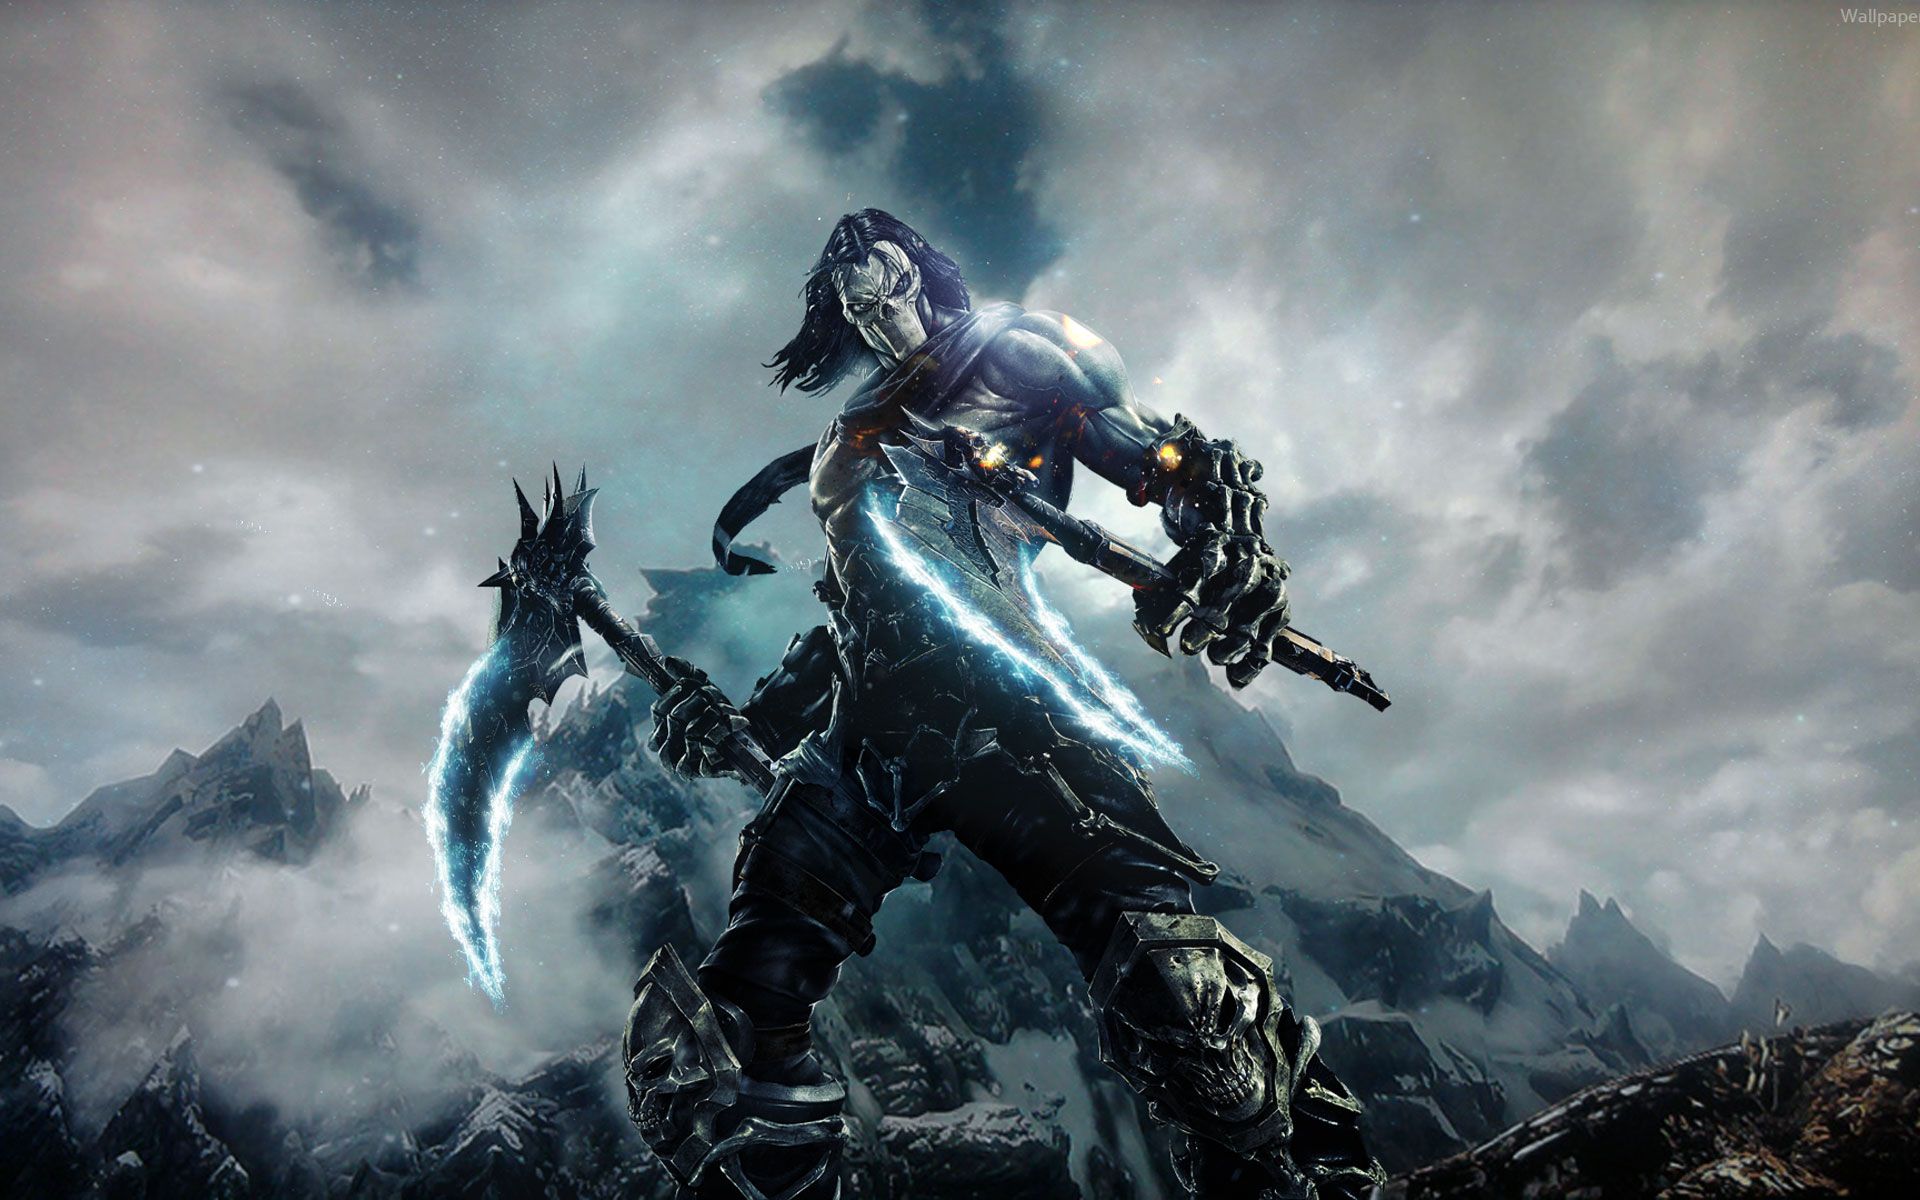 GenGAME Nordic Games Talks about the Future of Darksiders and Red